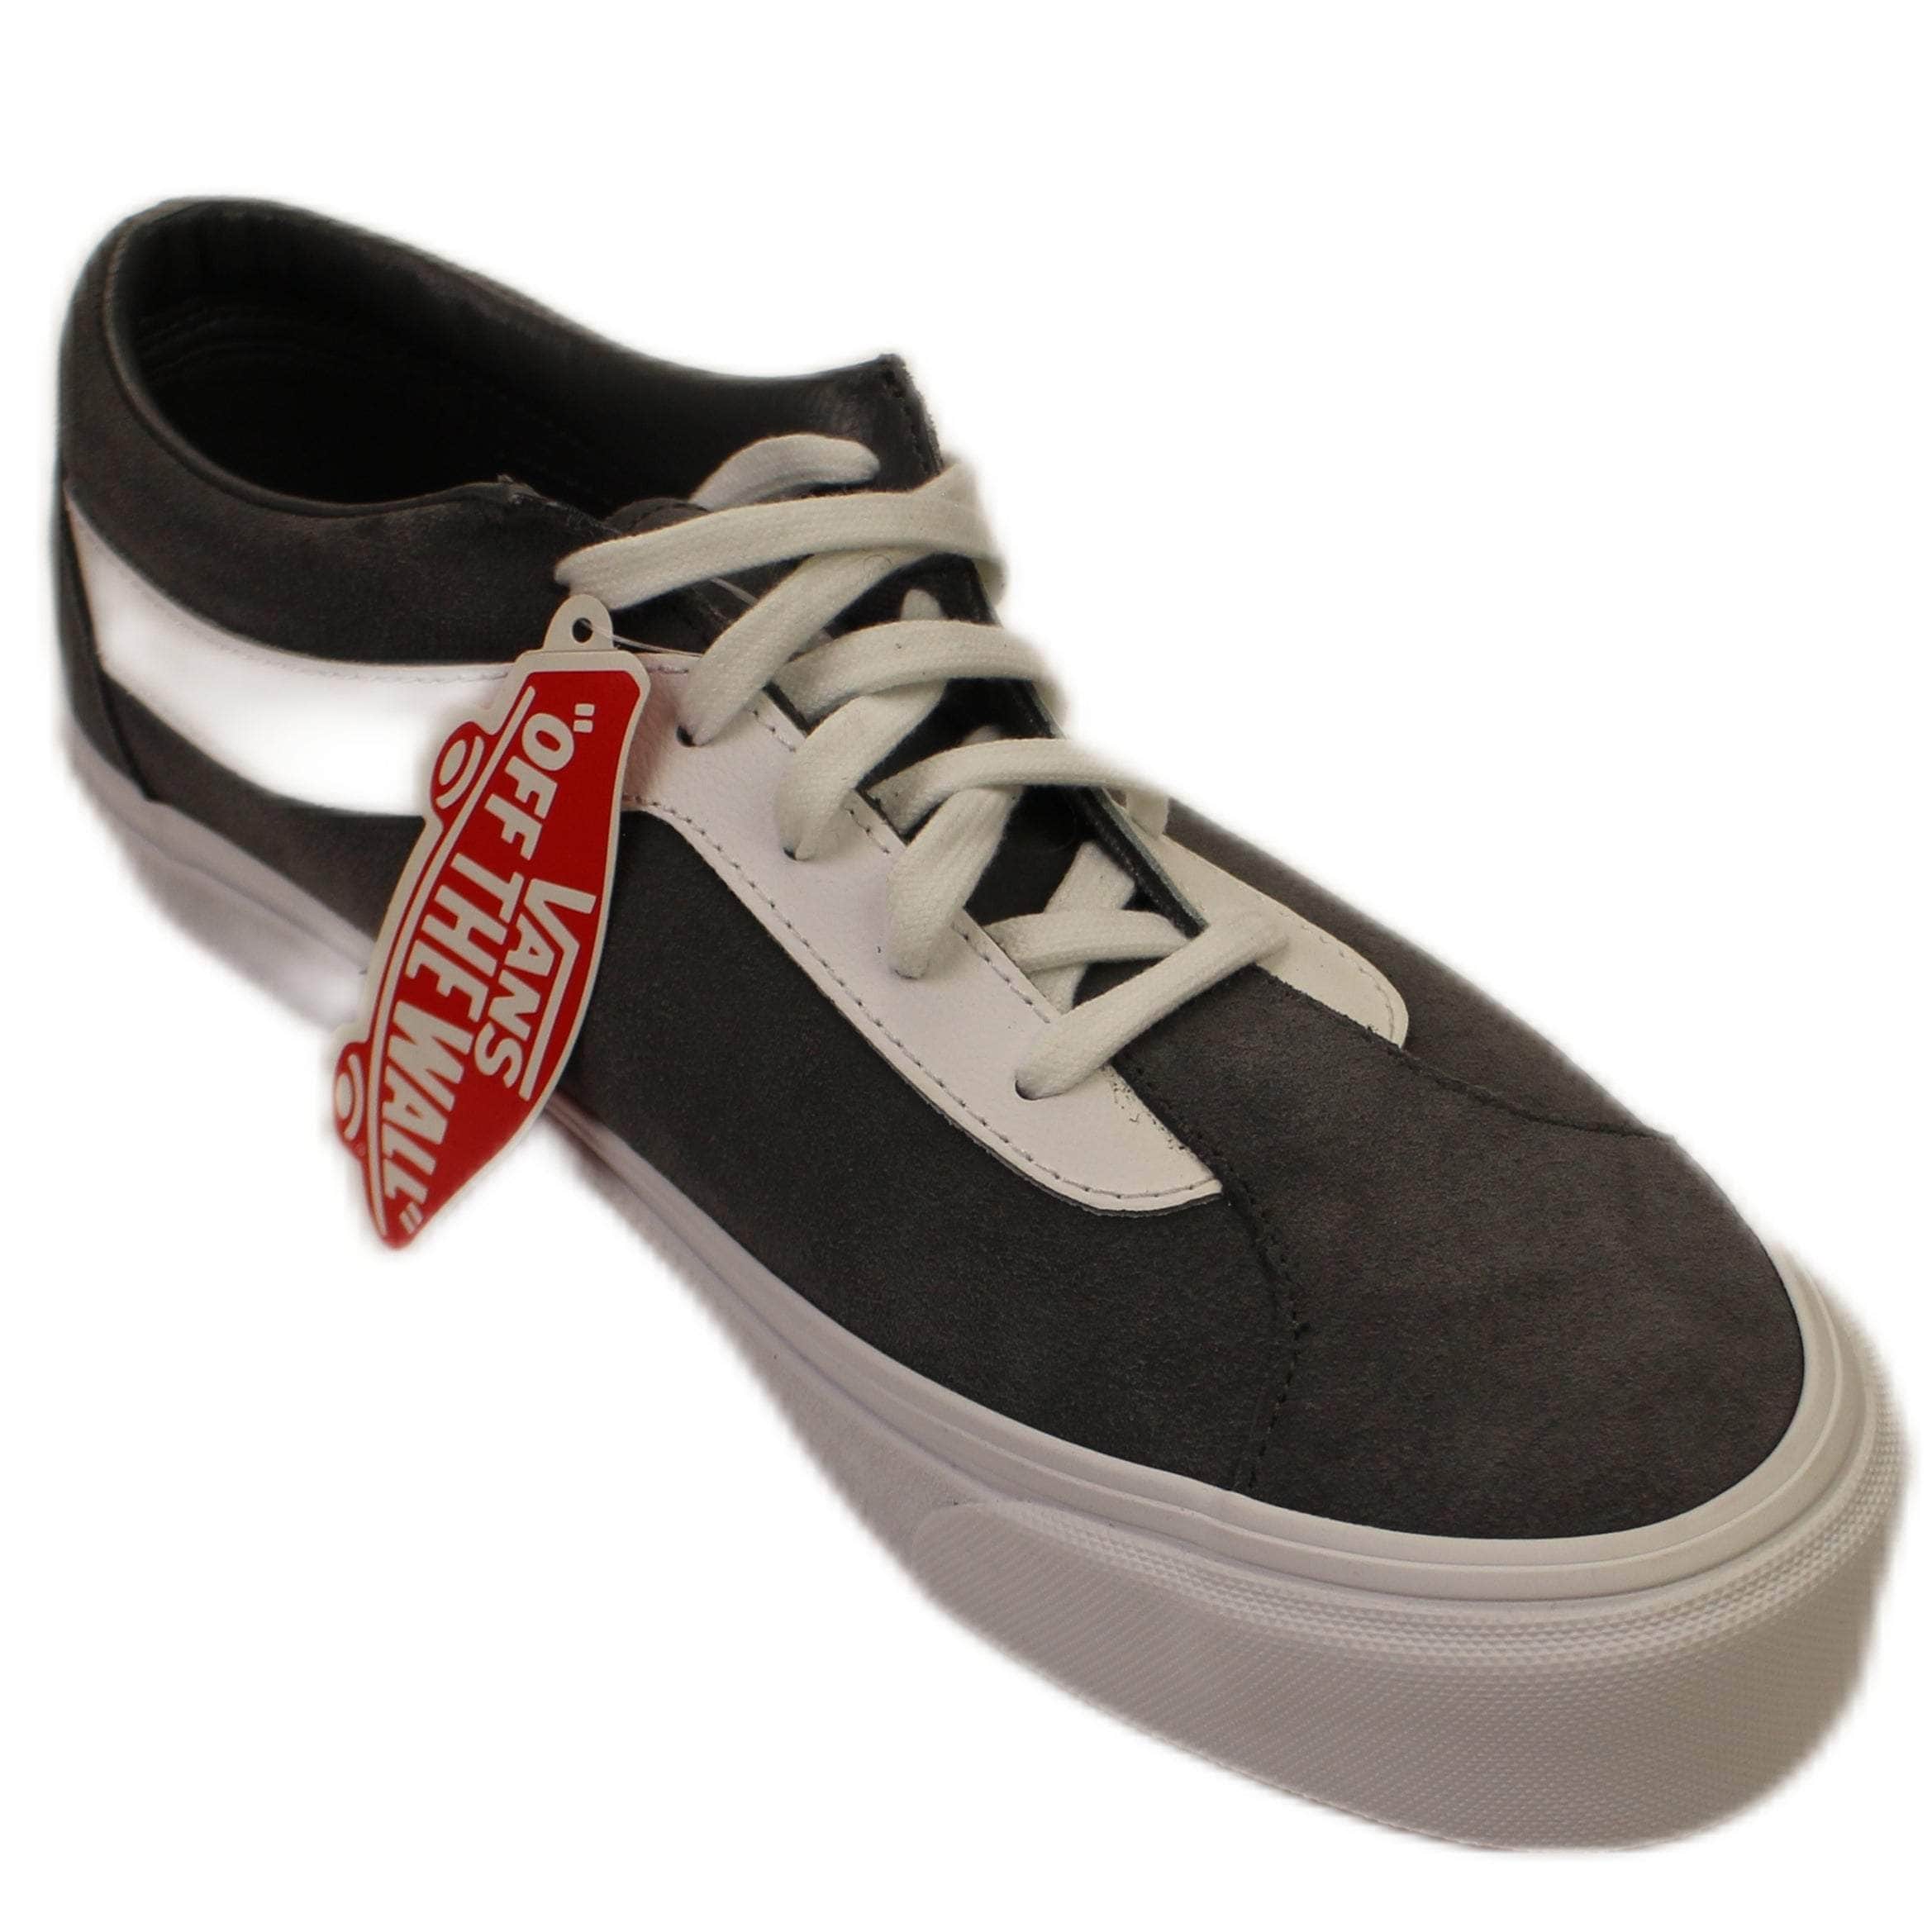 Vans channelenable-all, chicmi, couponcollection, main-shoes, shop375, size-11-5, under-250, unisex-sneakers 11.5 GREY U BOLD NI SNEAKERS 95-VNS-2011/11.5 95-VNS-2011/11.5